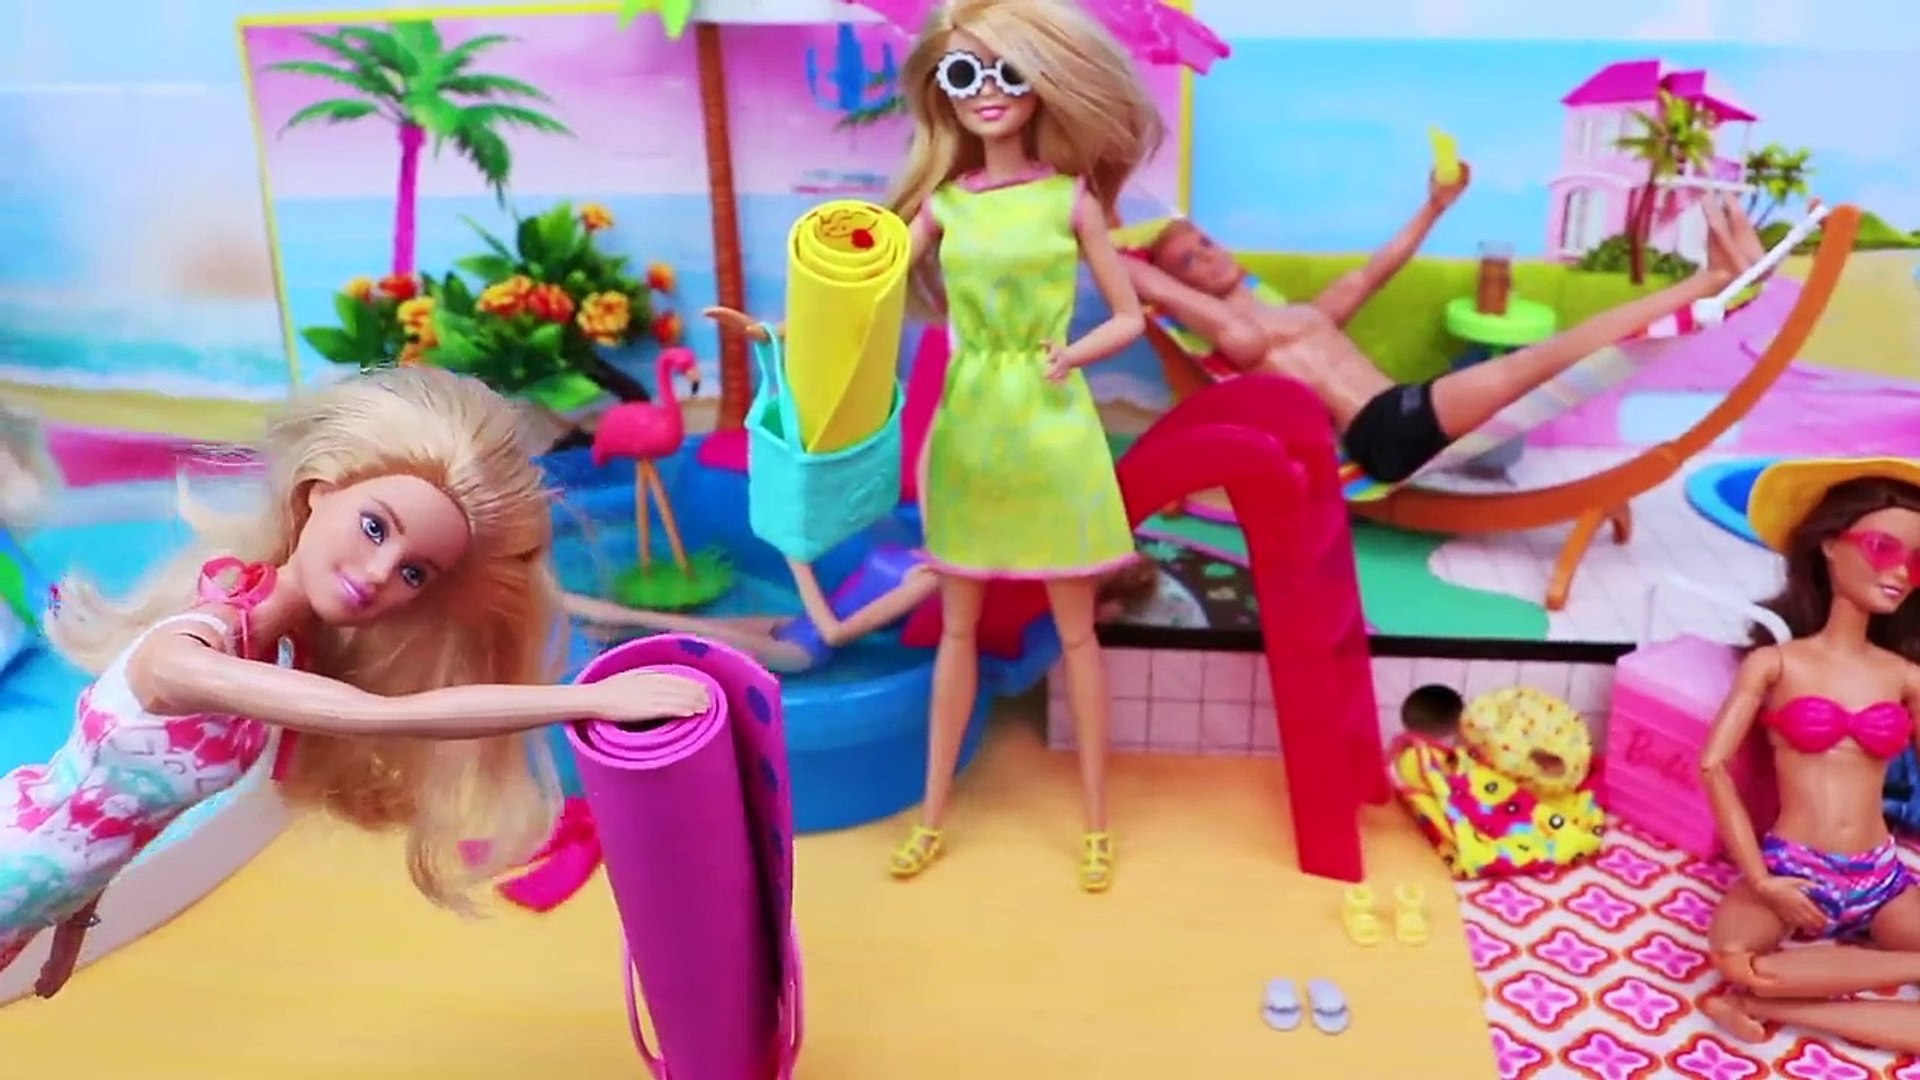 Barbie GIrl Swimming Pool Baby Dolls Beach Toys Play! - video Dailymotion